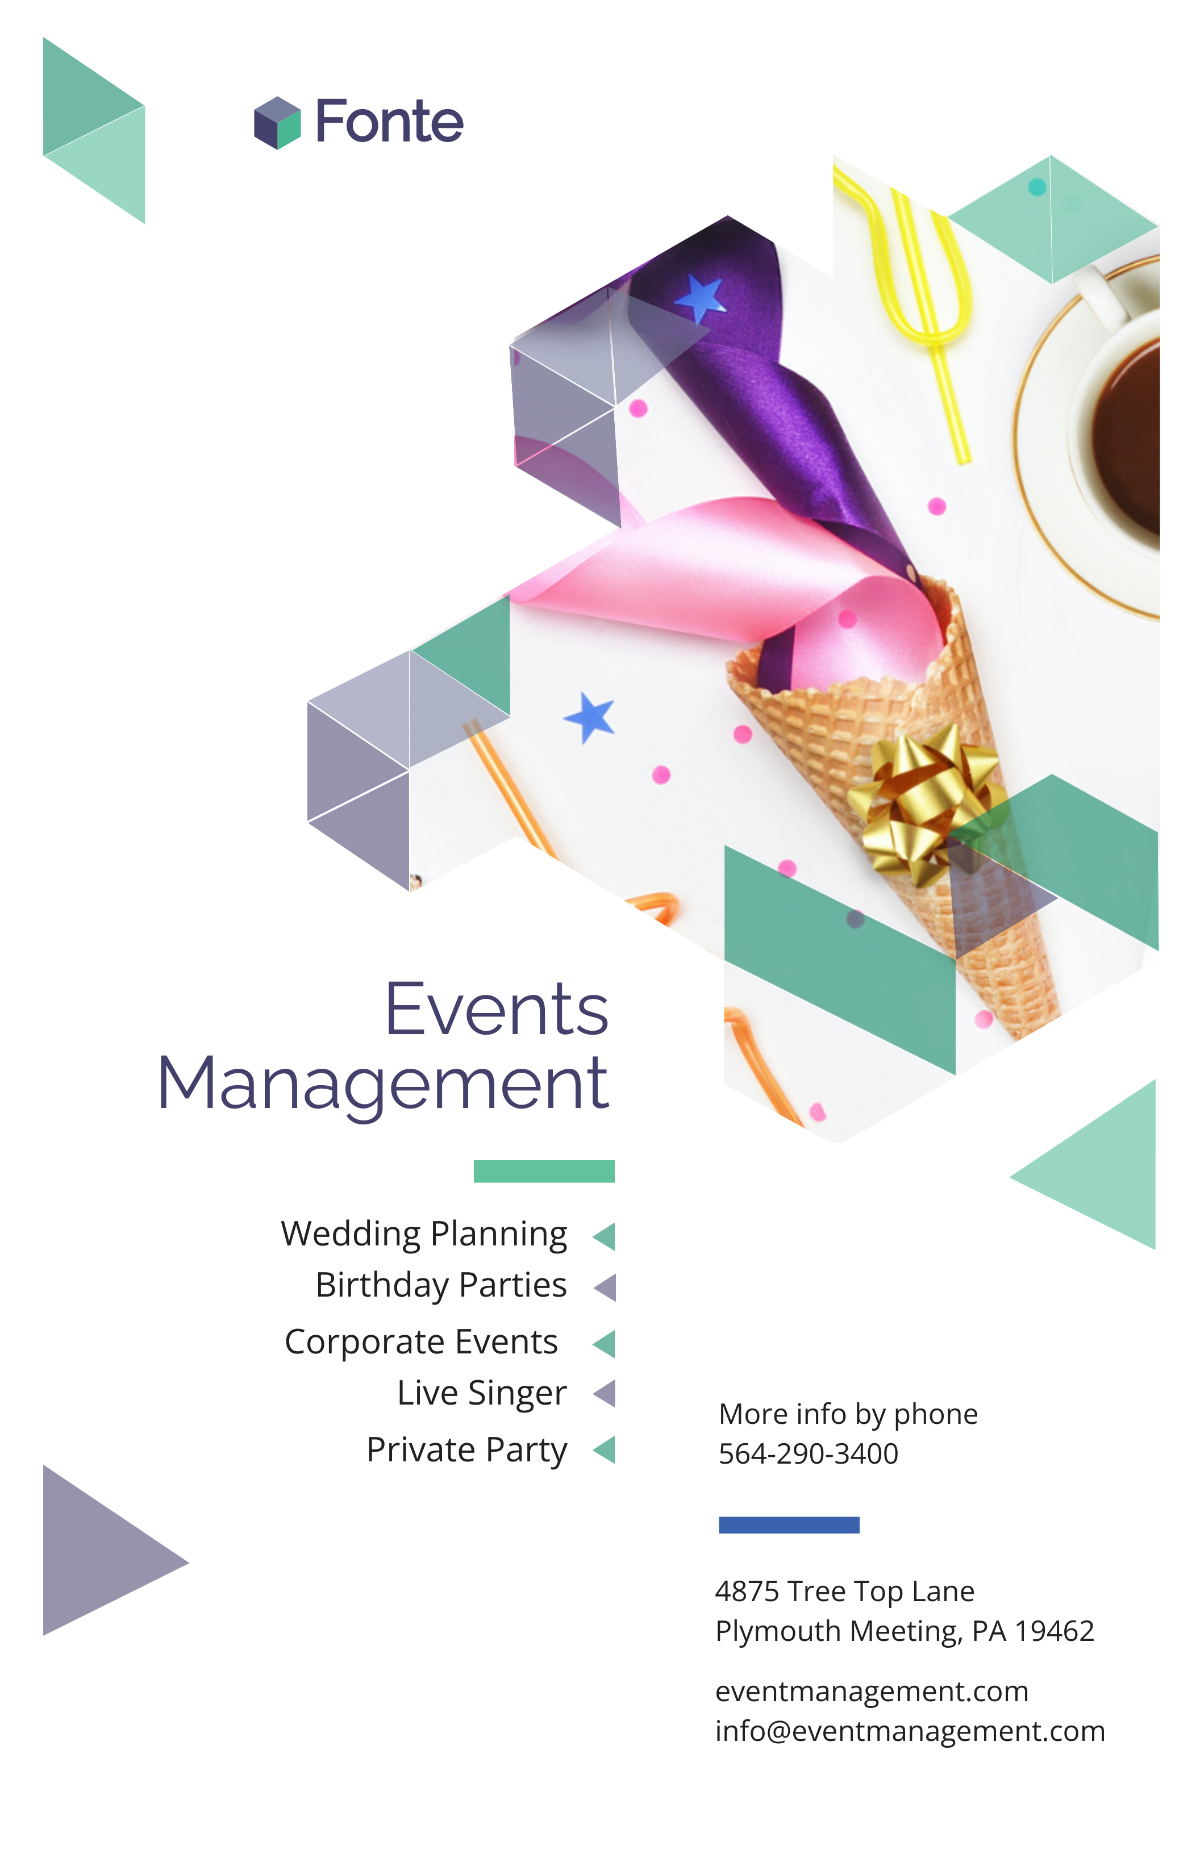 Event Management Poster Template